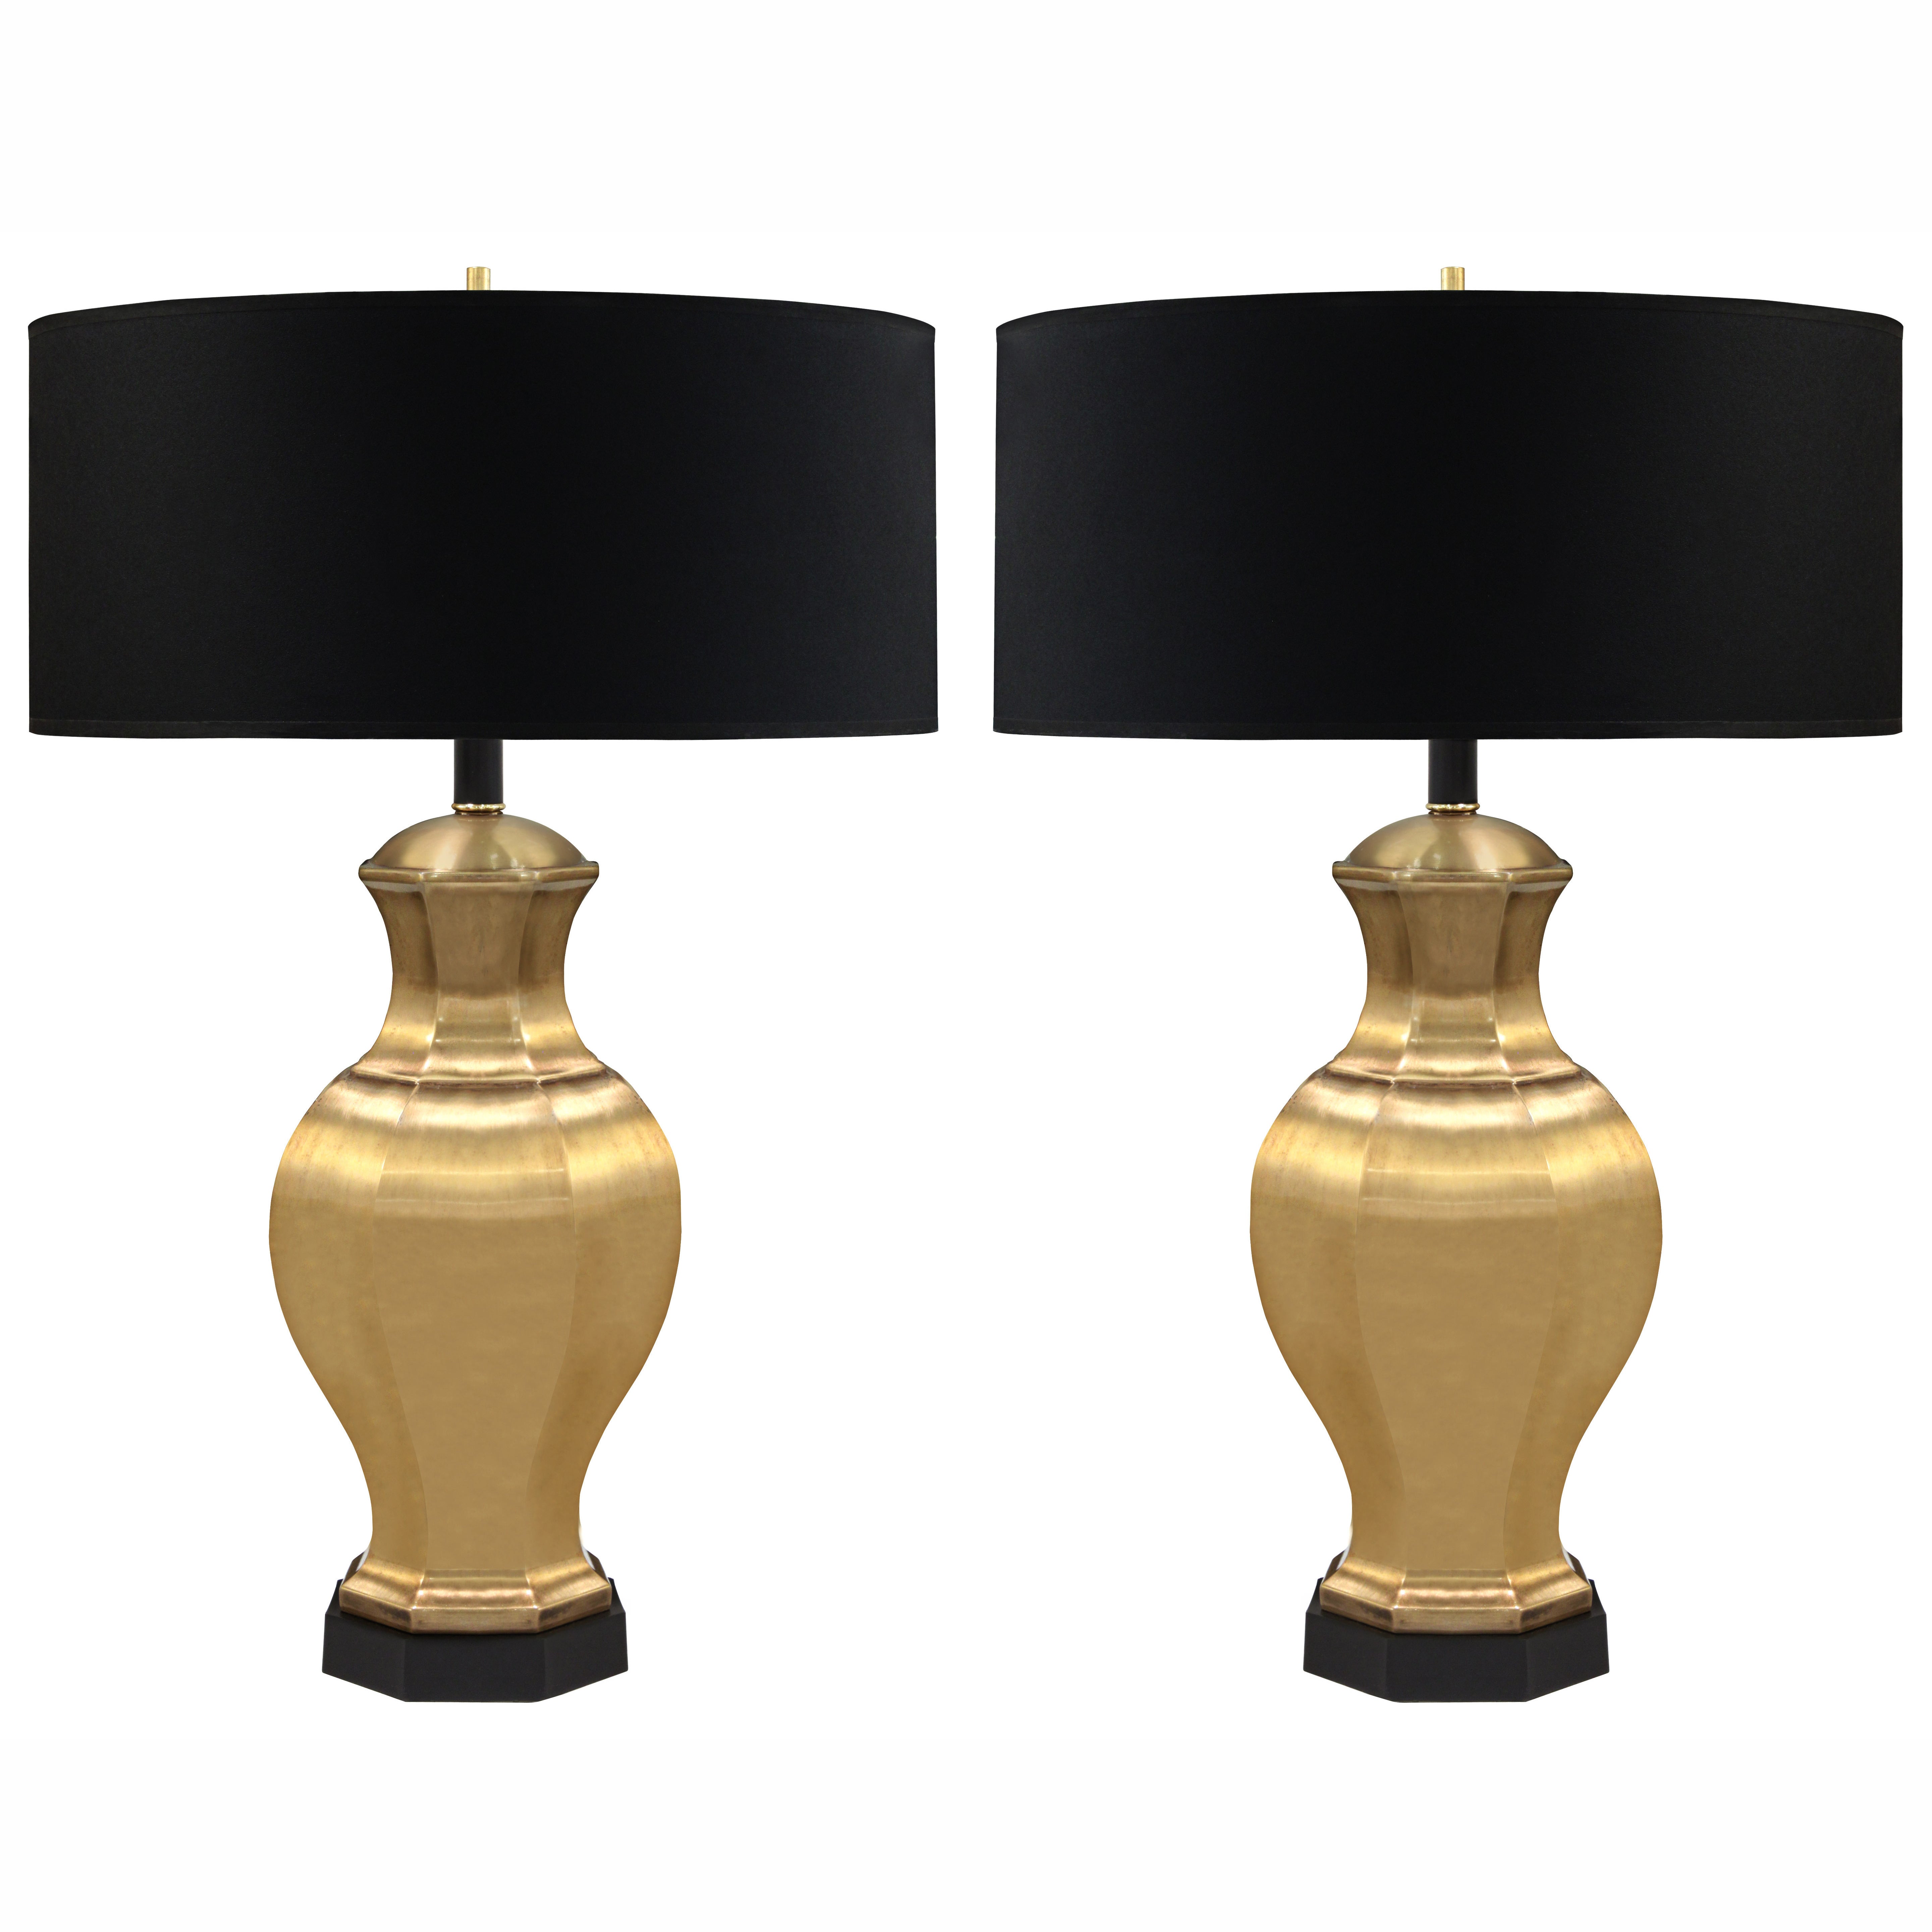 Pair of Table Lamps in Satin Brass by Chapman Lighting